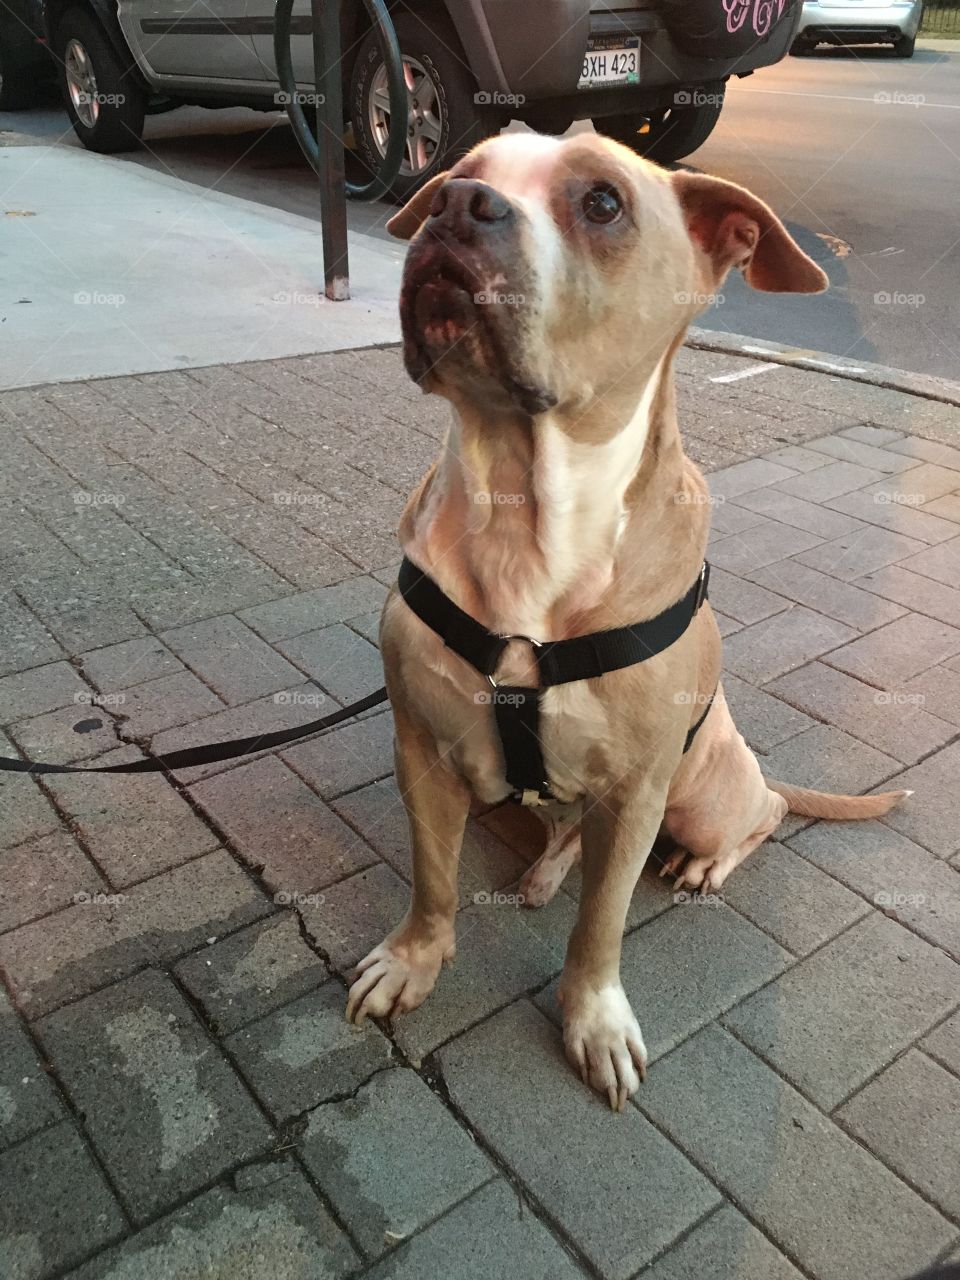 Awesome dog friend downtown 